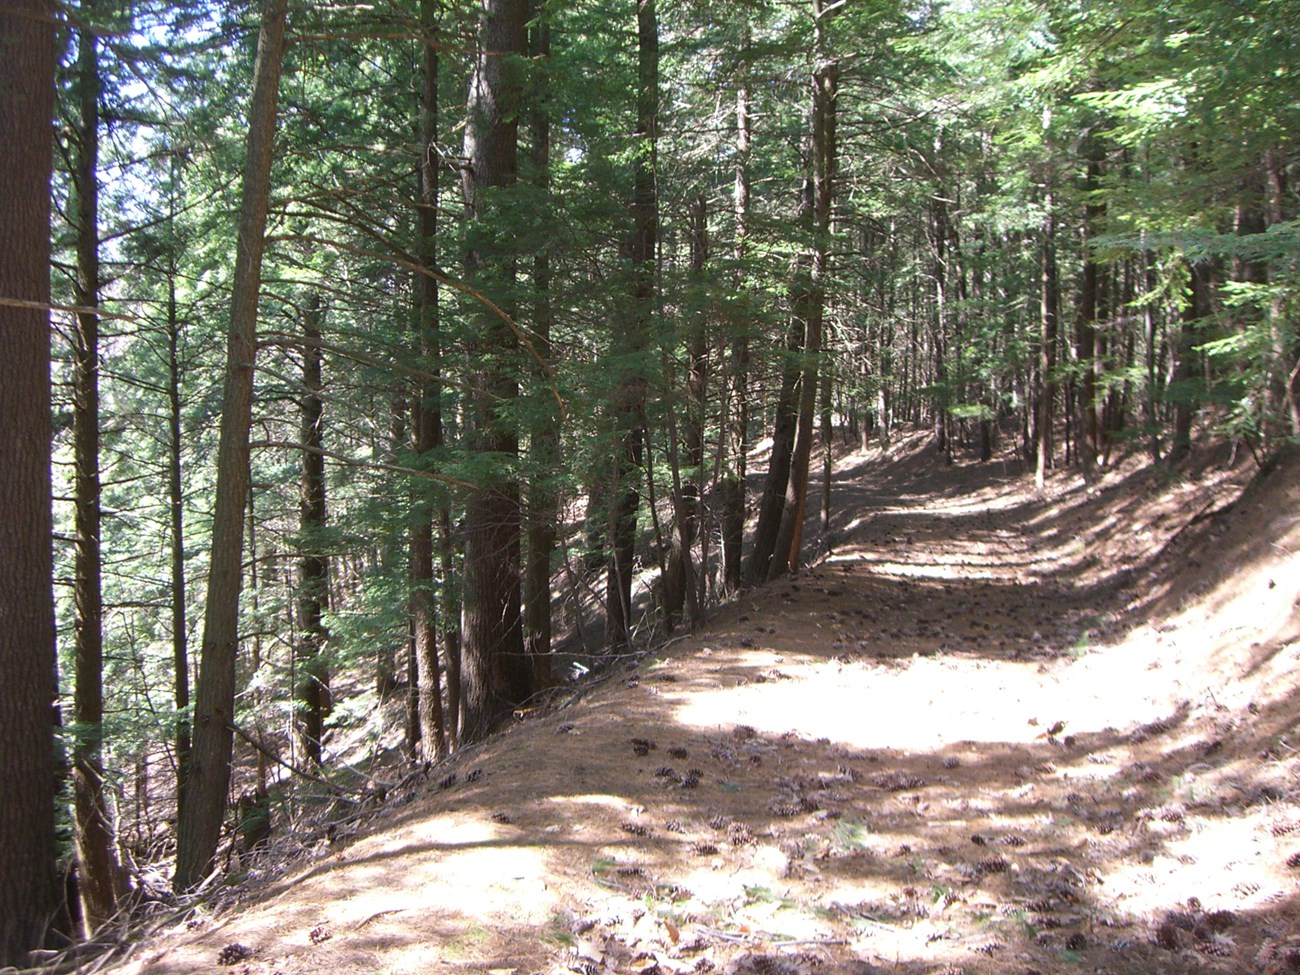 The a trail winds along a sand dune edge in the Rome Sand Plains Unique Area. This location has remained largely undeveloped since the 1700s and is now preserved by the State of New York and several private organizations.